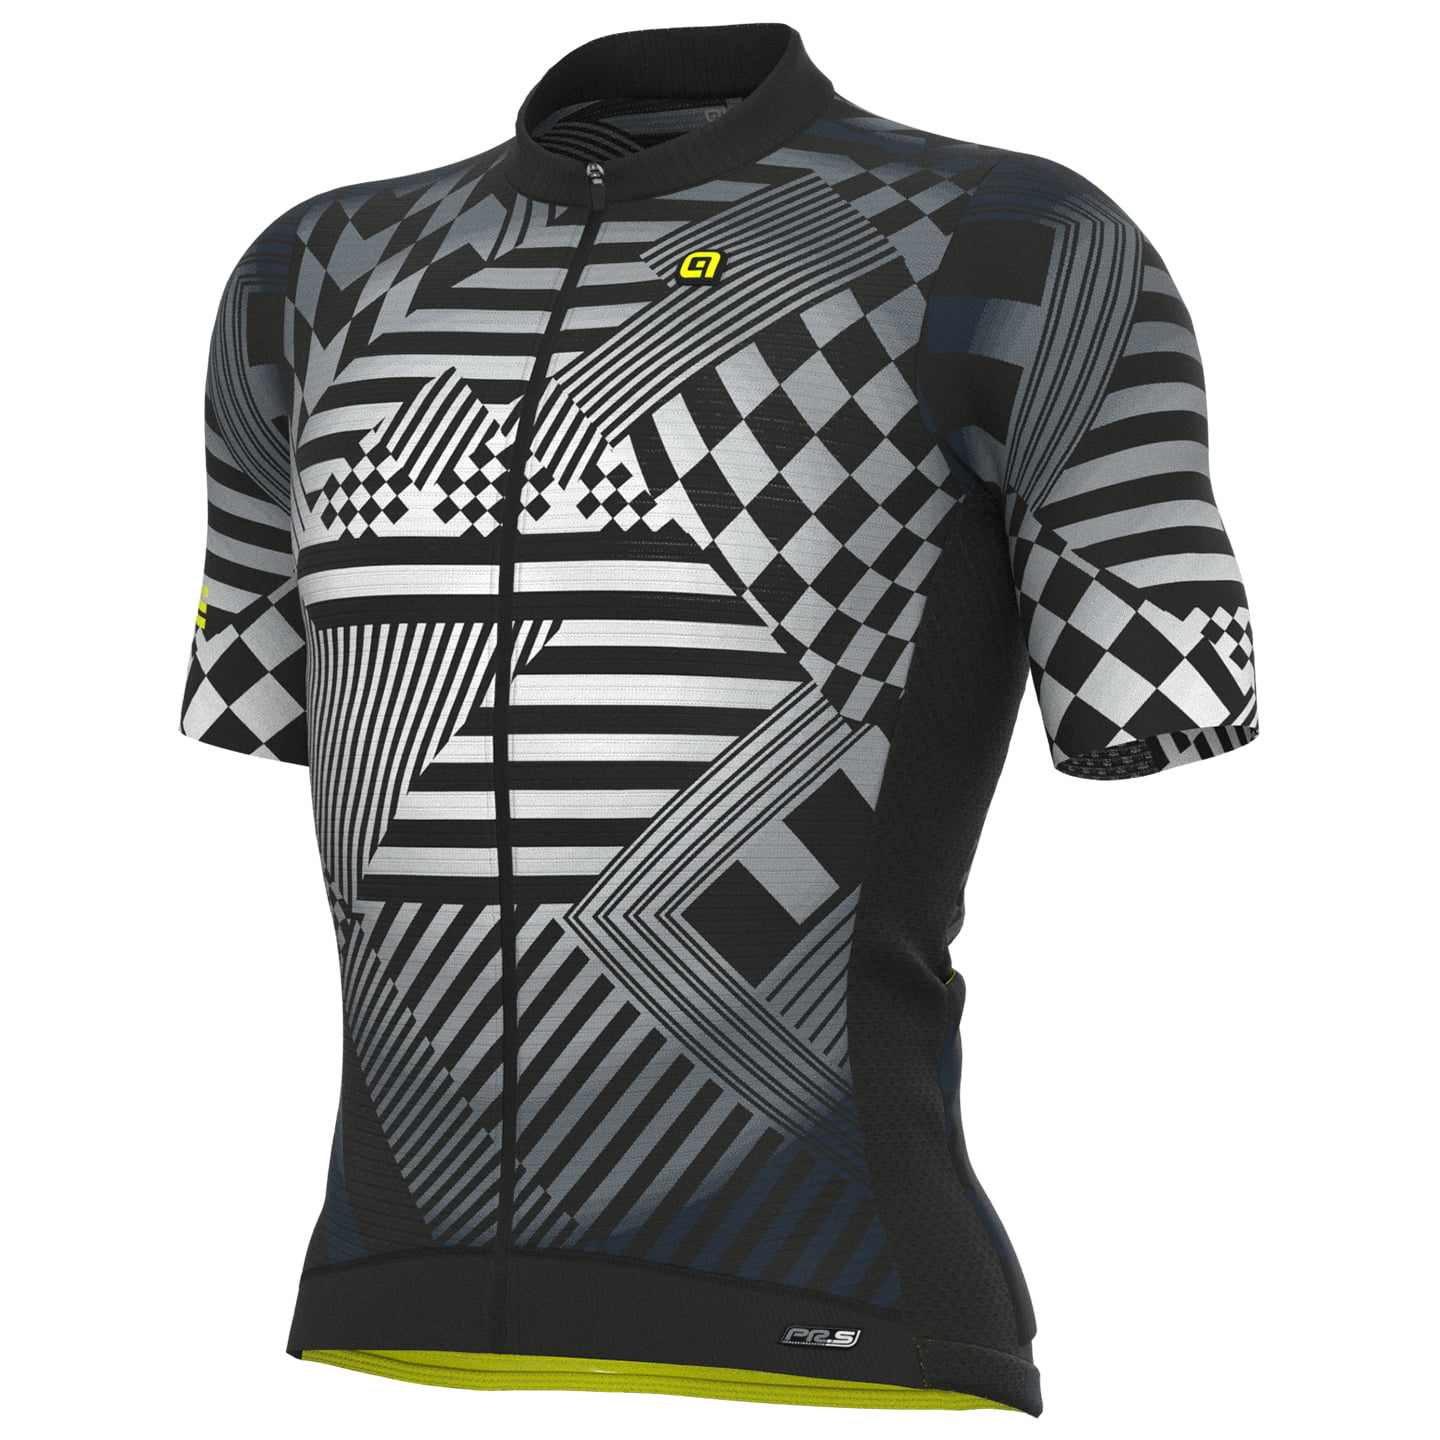 ALE Checkers Short Sleeve Jersey Short Sleeve Jersey, for men, size S, Cycling jersey, Cycling clothing